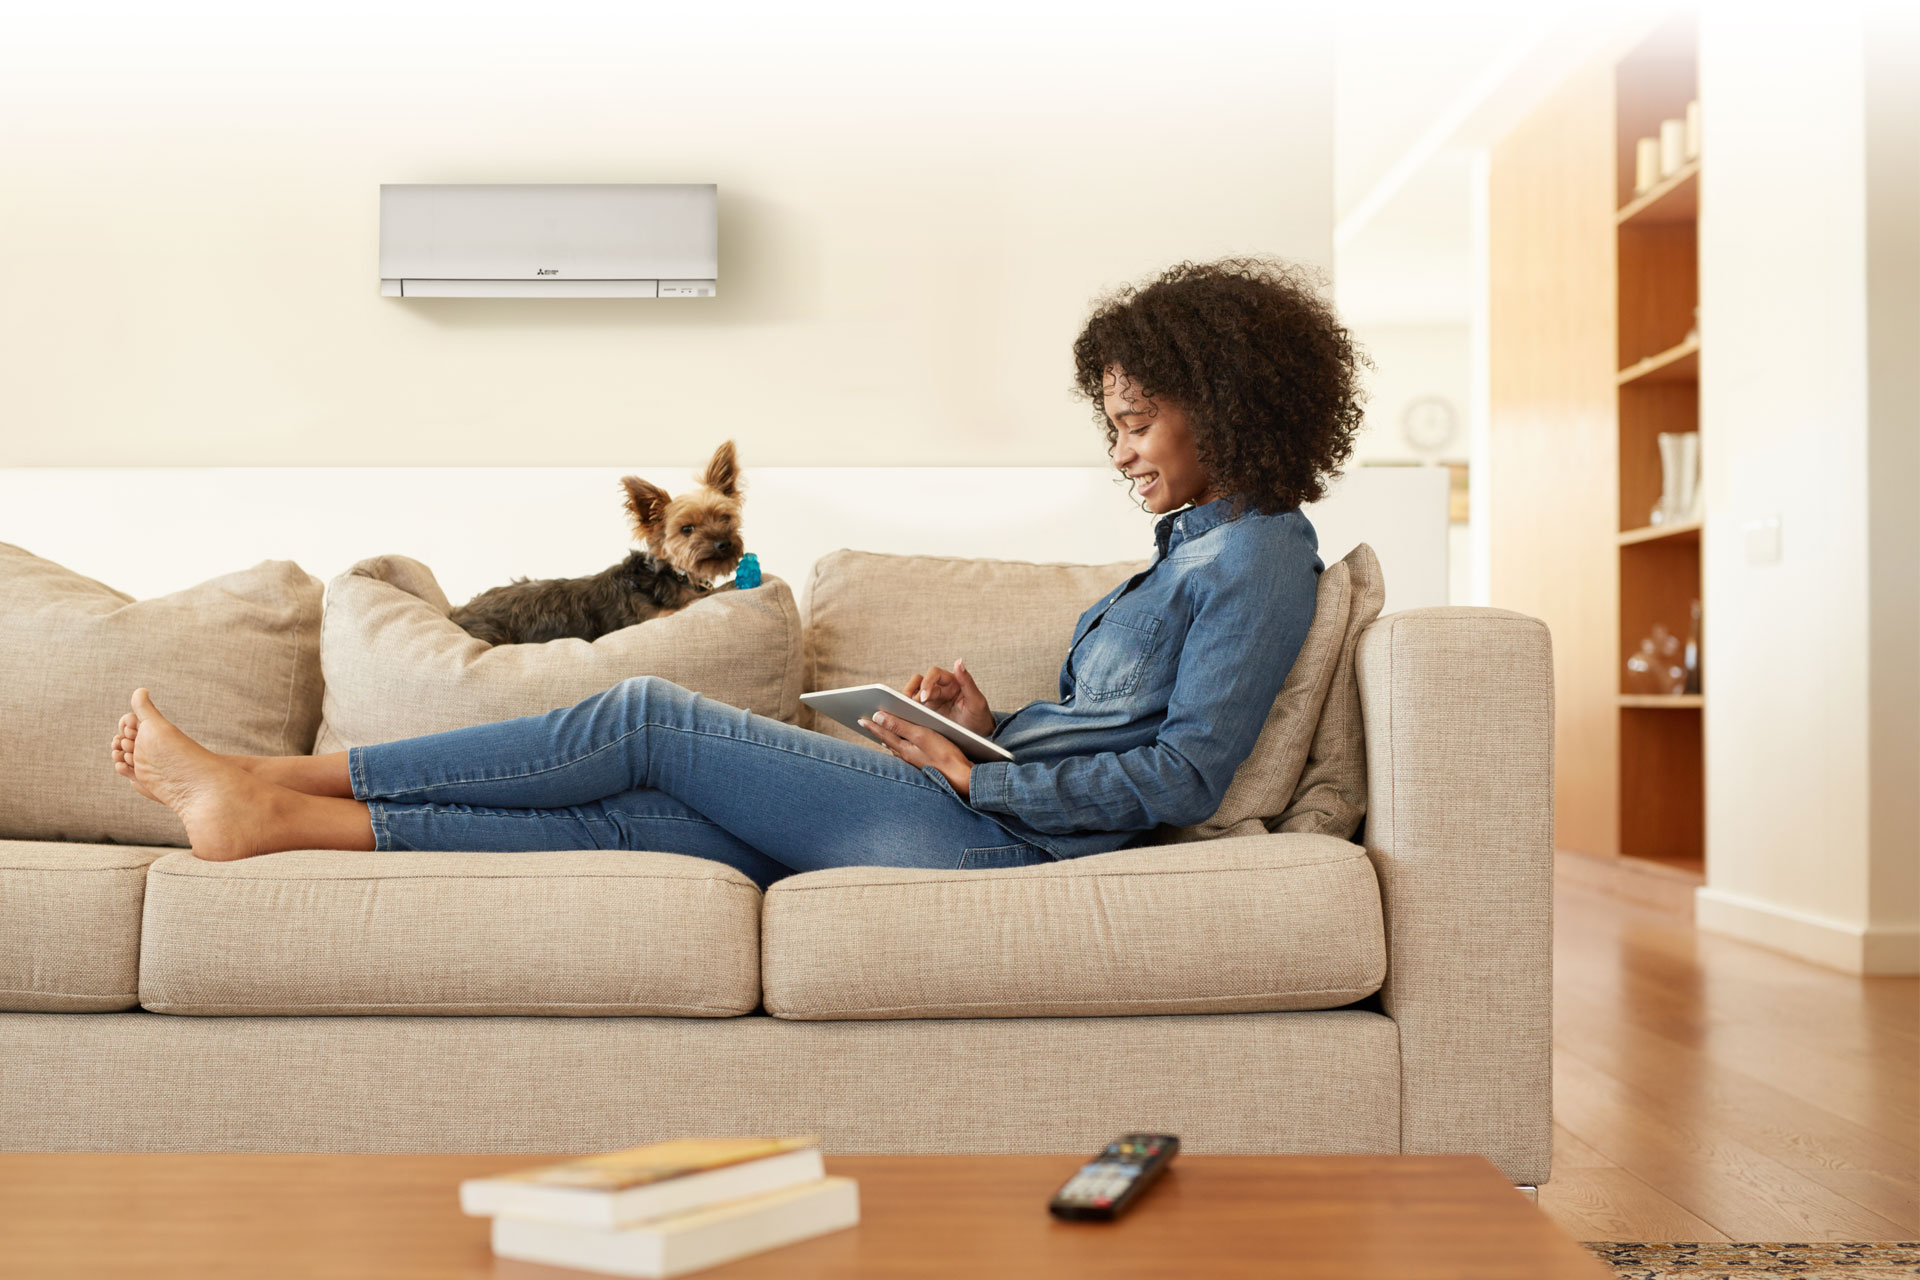 Mitsubishi Ductless In Living Room